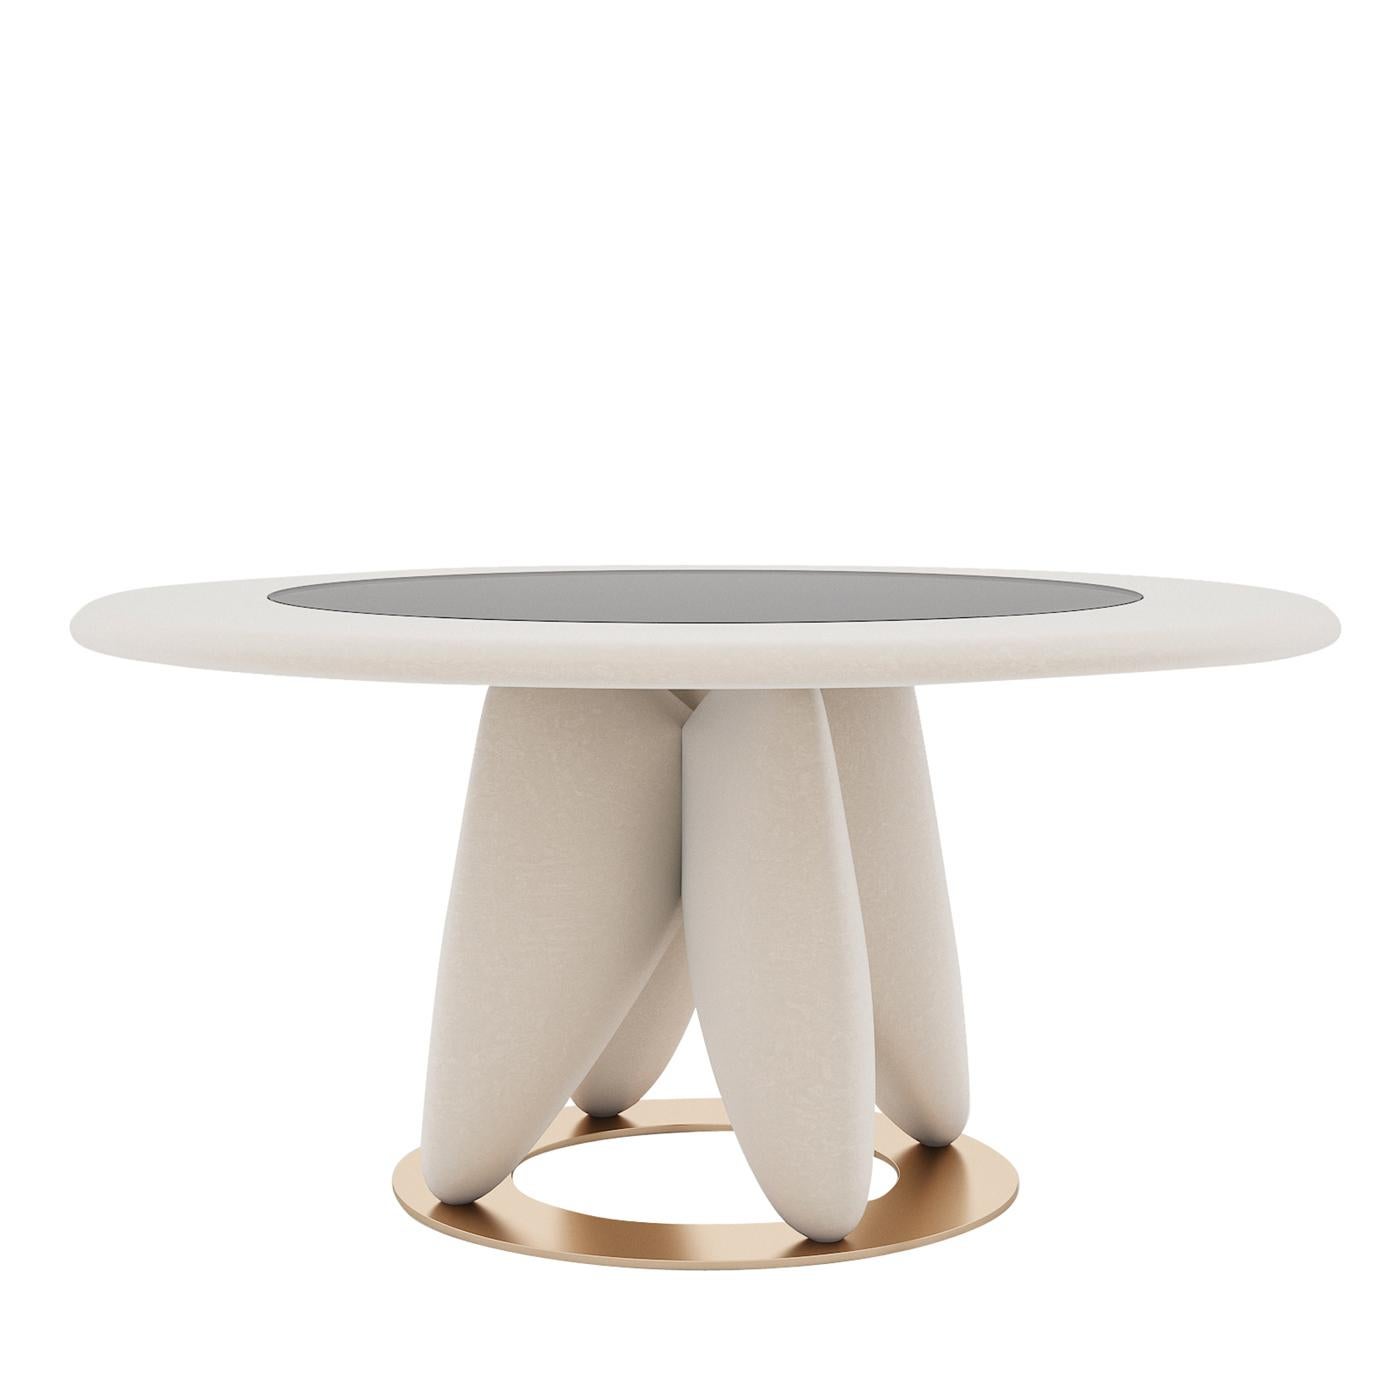 Distinguished by an exquisitely modern design, this wooden dining table is a stunning exercise of geometric balance. Its white-lacquered components (part of the top and legs) delicately complement the round gold-finished metal ring that functions as